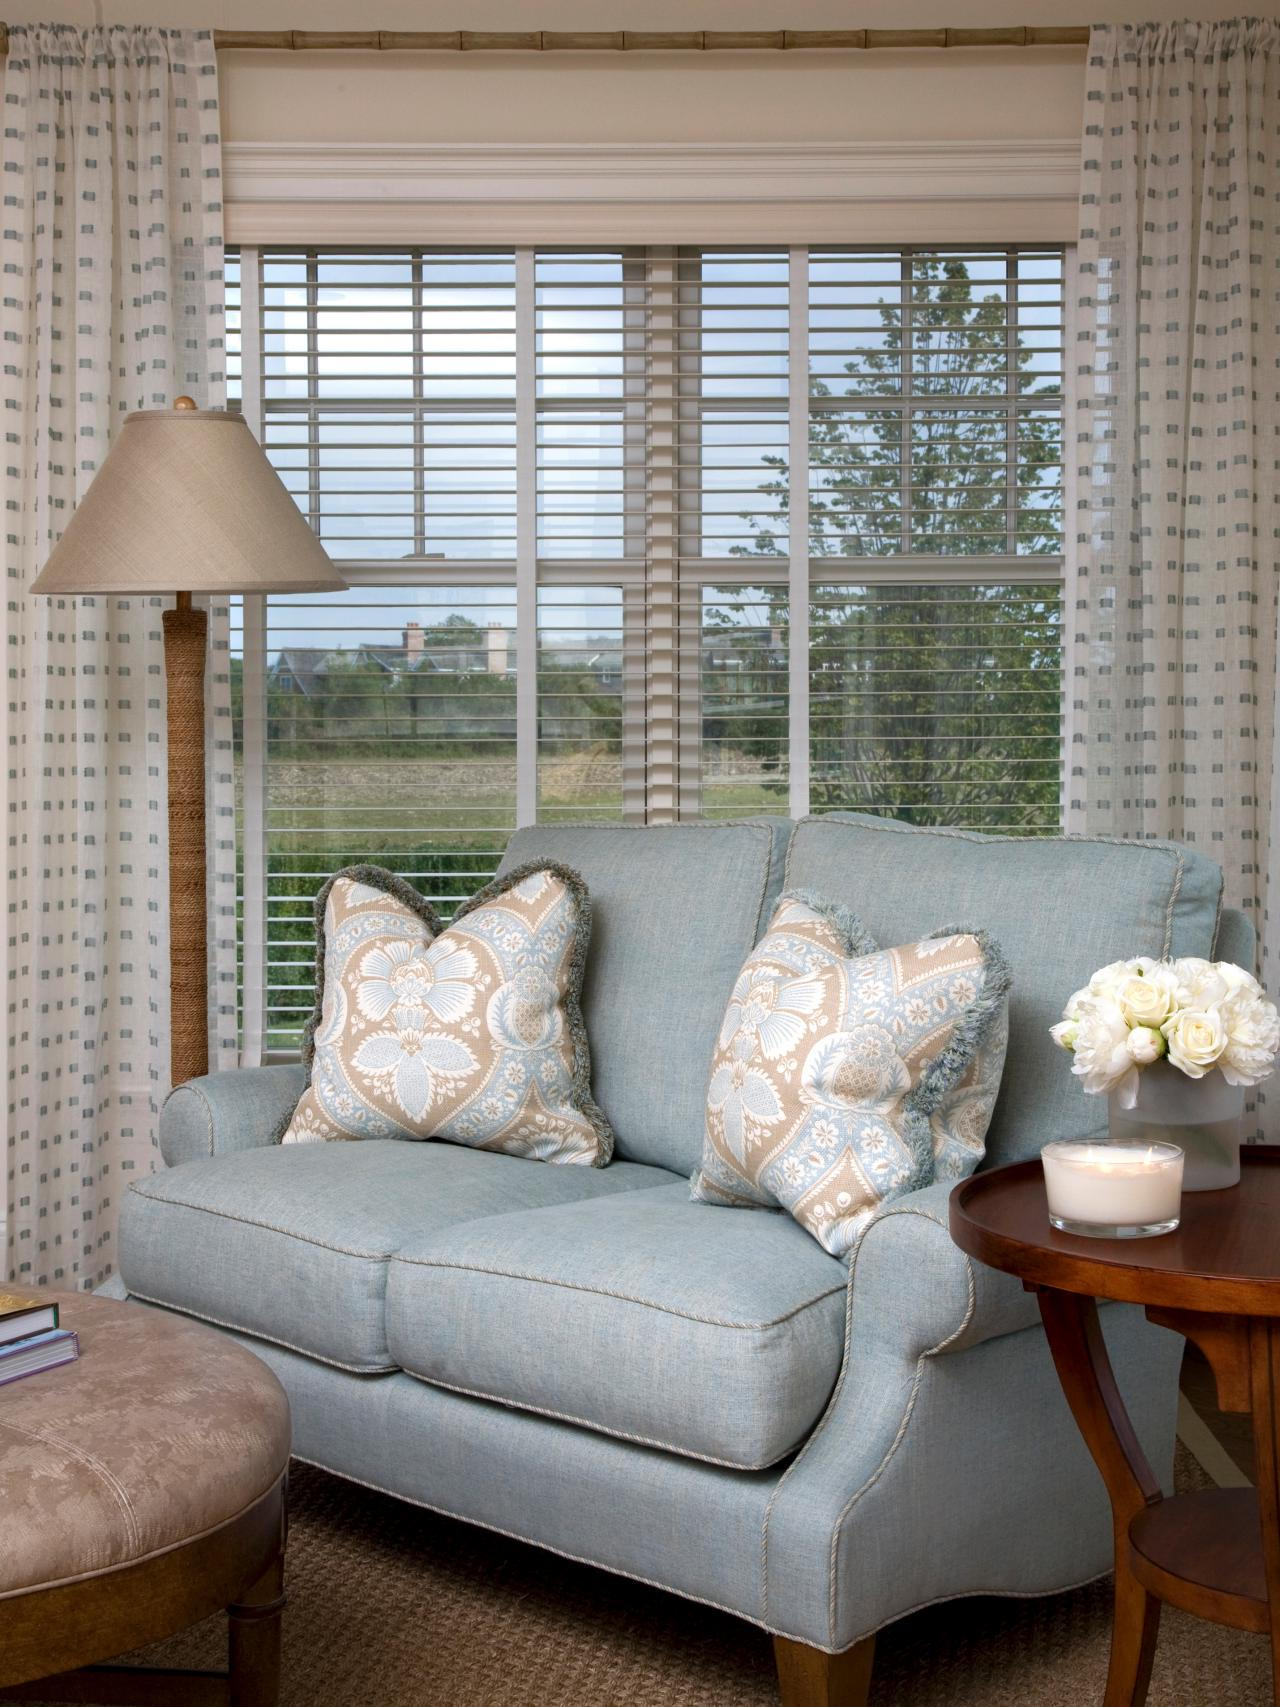 Living Room Window Treatments Ideas to Decorate a Living Room